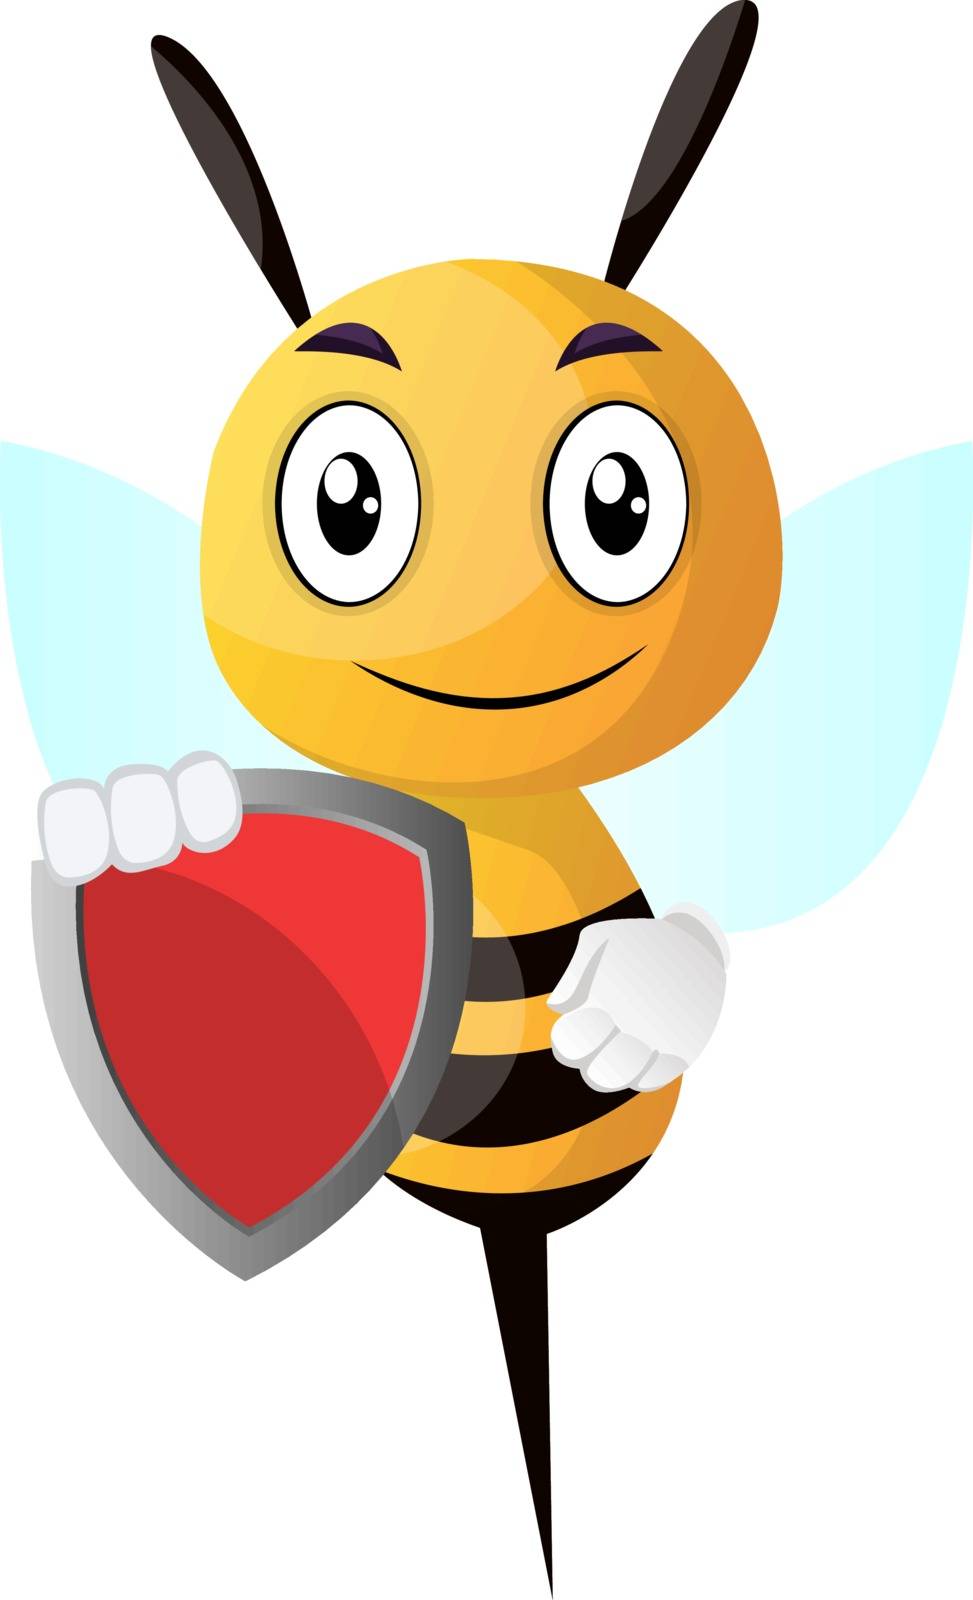 Bee holding a shield, illustration, vector on white background. by Morphart